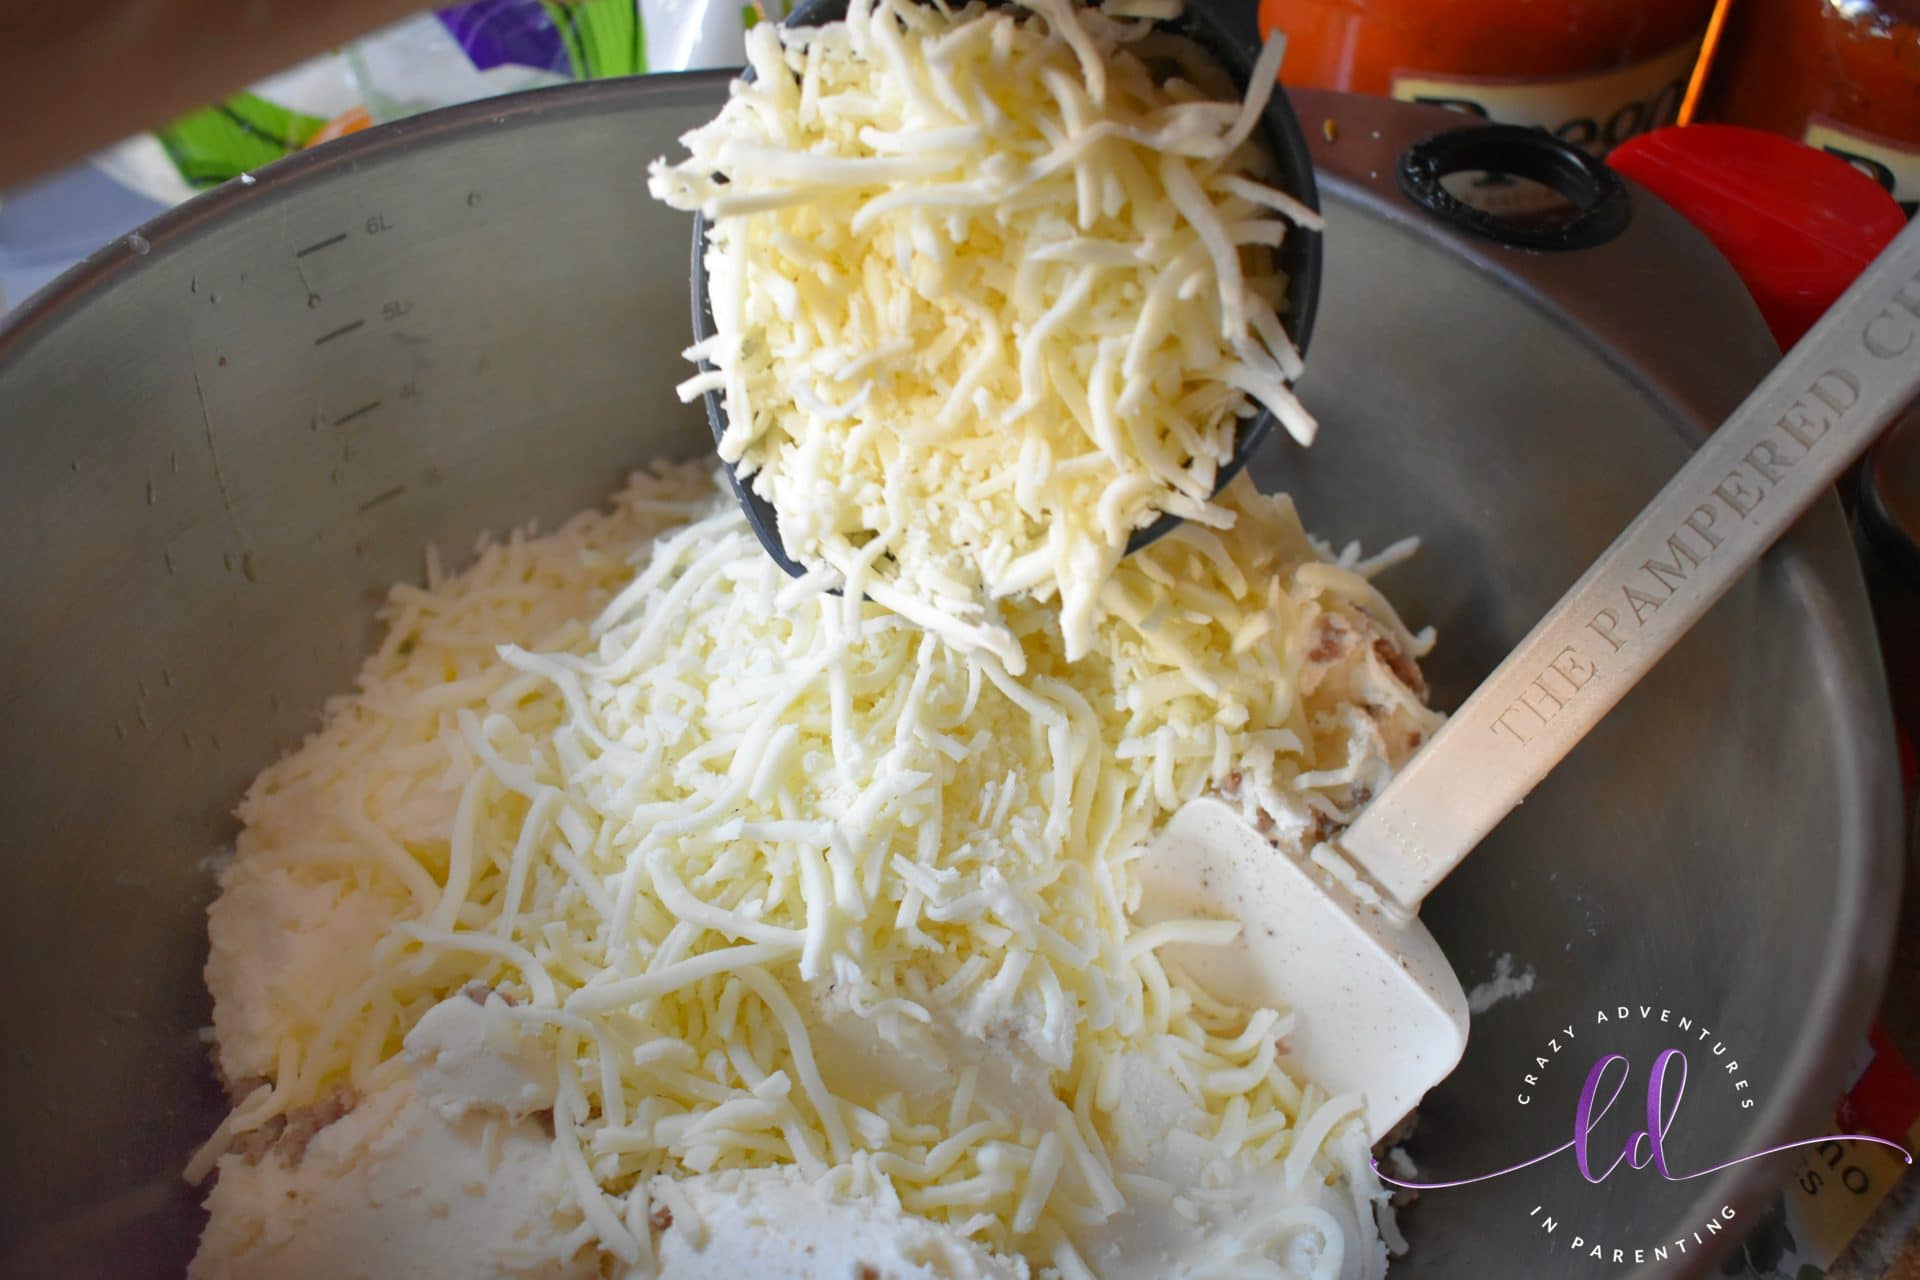 Add mozzarella cheese to meat mixture for homemade lasagna